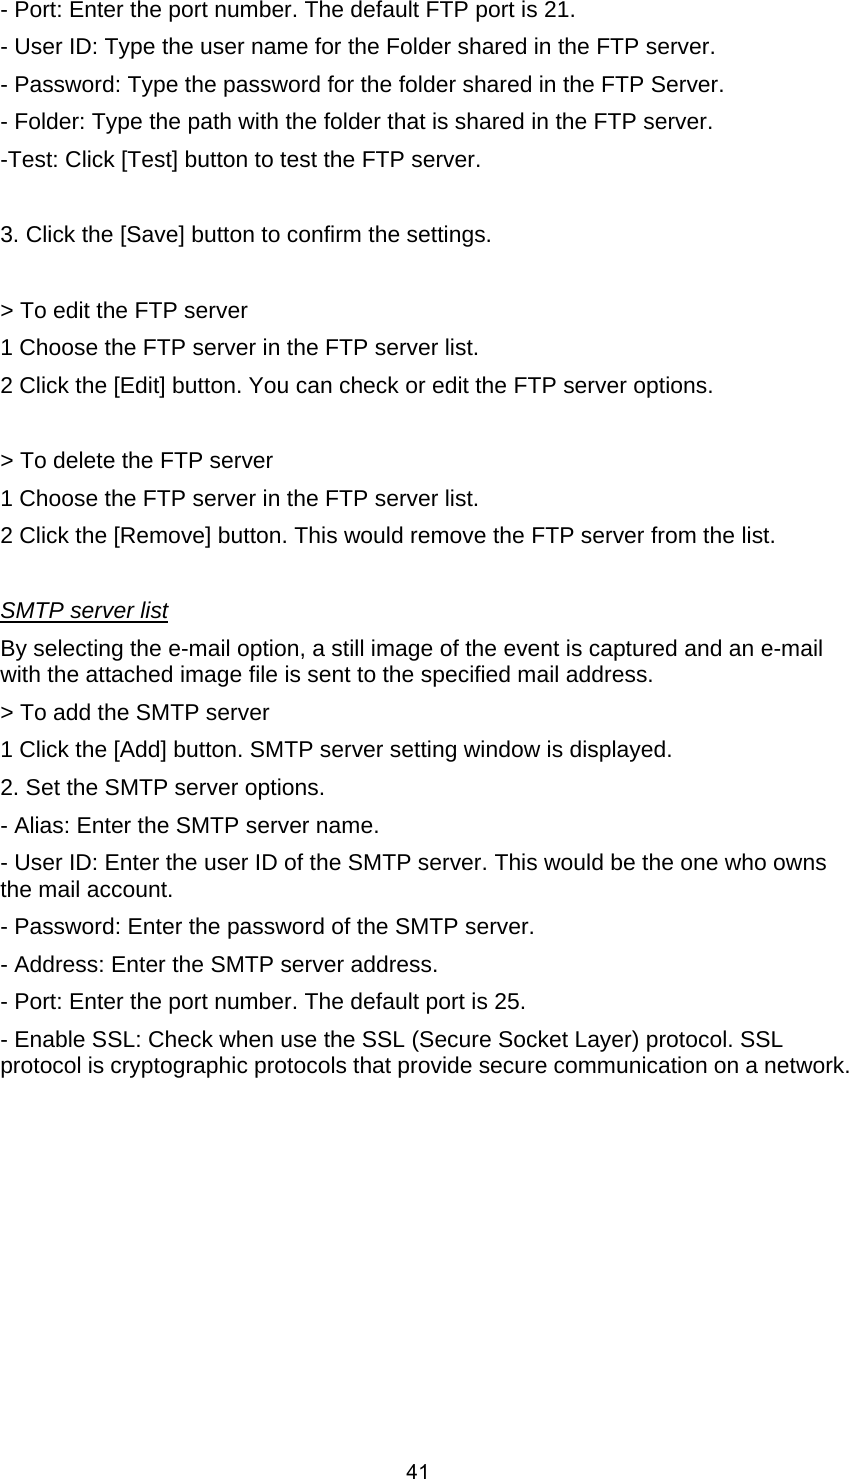  41- Port: Enter the port number. The default FTP port is 21.   - User ID: Type the user name for the Folder shared in the FTP server.   - Password: Type the password for the folder shared in the FTP Server.   - Folder: Type the path with the folder that is shared in the FTP server.     -Test: Click [Test] button to test the FTP server.        3. Click the [Save] button to confirm the settings.        &gt; To edit the FTP server     1 Choose the FTP server in the FTP server list.     2 Click the [Edit] button. You can check or edit the FTP server options.        &gt; To delete the FTP server     1 Choose the FTP server in the FTP server list.     2 Click the [Remove] button. This would remove the FTP server from the list.        SMTP server list By selecting the e-mail option, a still image of the event is captured and an e-mail with the attached image file is sent to the specified mail address.     &gt; To add the SMTP server     1 Click the [Add] button. SMTP server setting window is displayed.     2. Set the SMTP server options.     - Alias: Enter the SMTP server name.     - User ID: Enter the user ID of the SMTP server. This would be the one who owns the mail account.     - Password: Enter the password of the SMTP server.     - Address: Enter the SMTP server address.     - Port: Enter the port number. The default port is 25.   - Enable SSL: Check when use the SSL (Secure Socket Layer) protocol. SSL protocol is cryptographic protocols that provide secure communication on a network. 